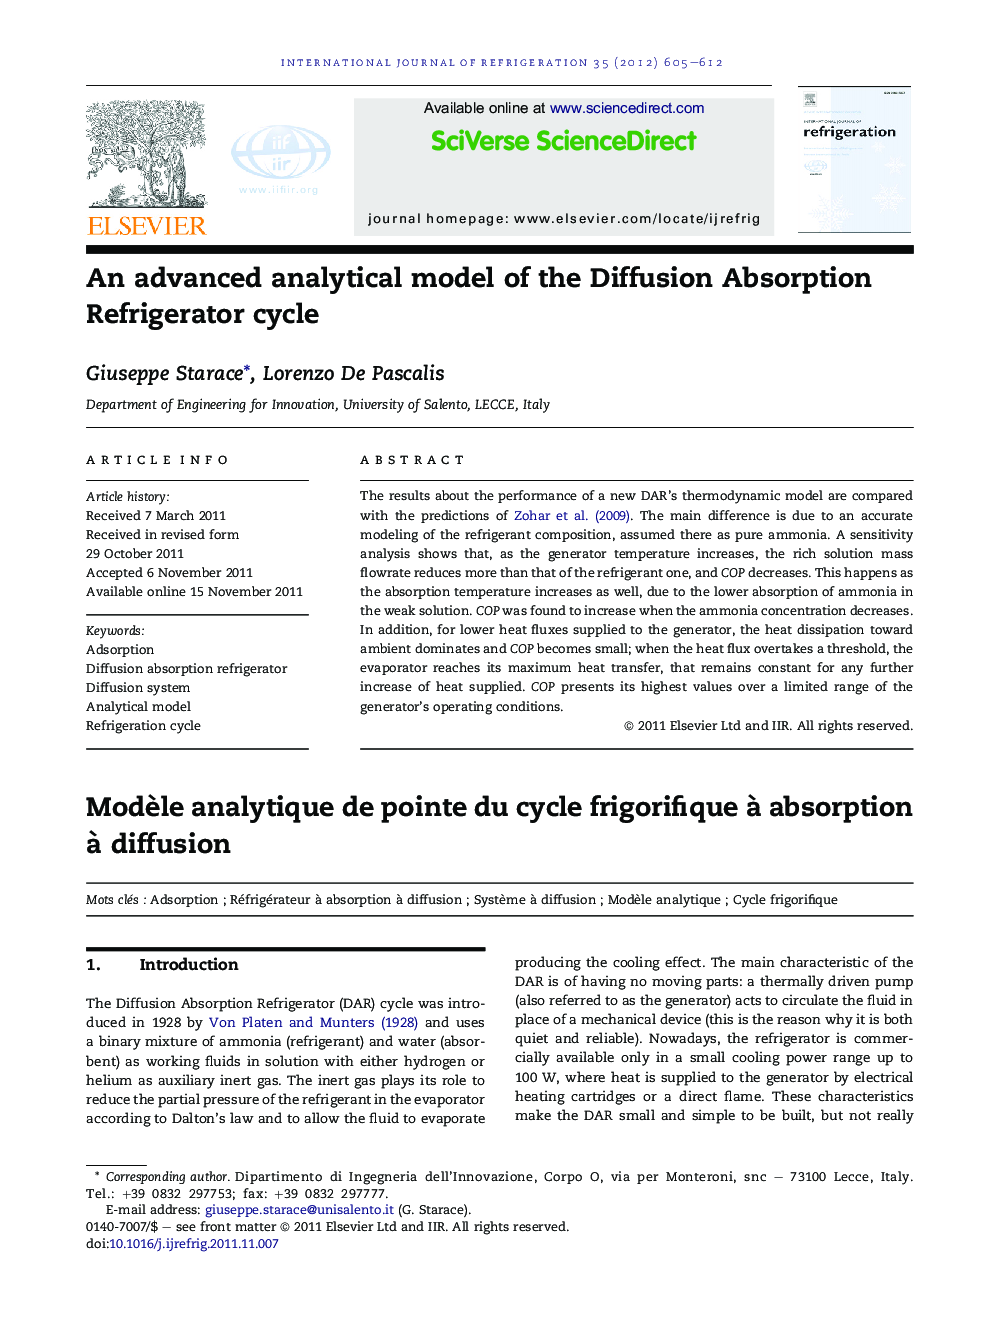 An advanced analytical model of the Diffusion Absorption Refrigerator cycle